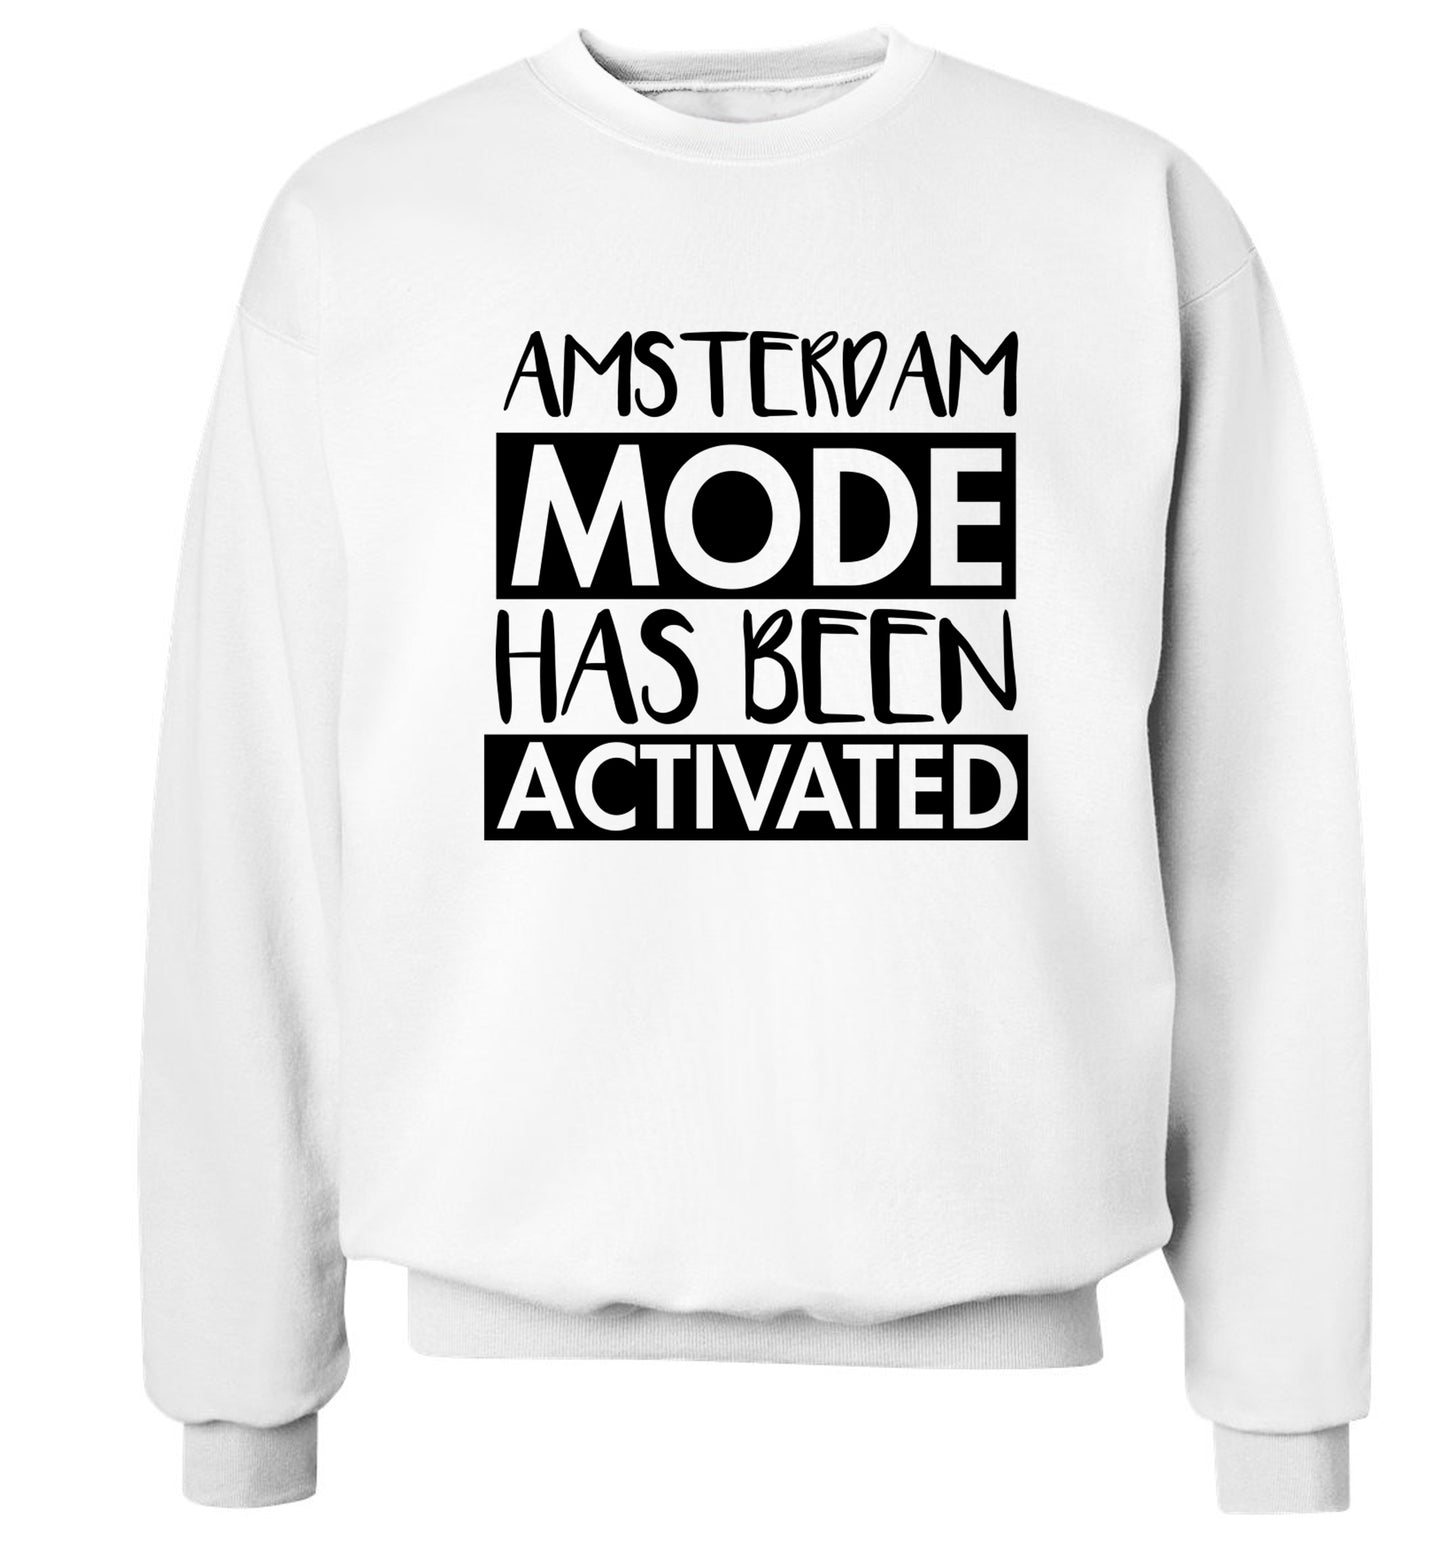 Amsterdam mode has been activated Adult's unisex white Sweater 2XL